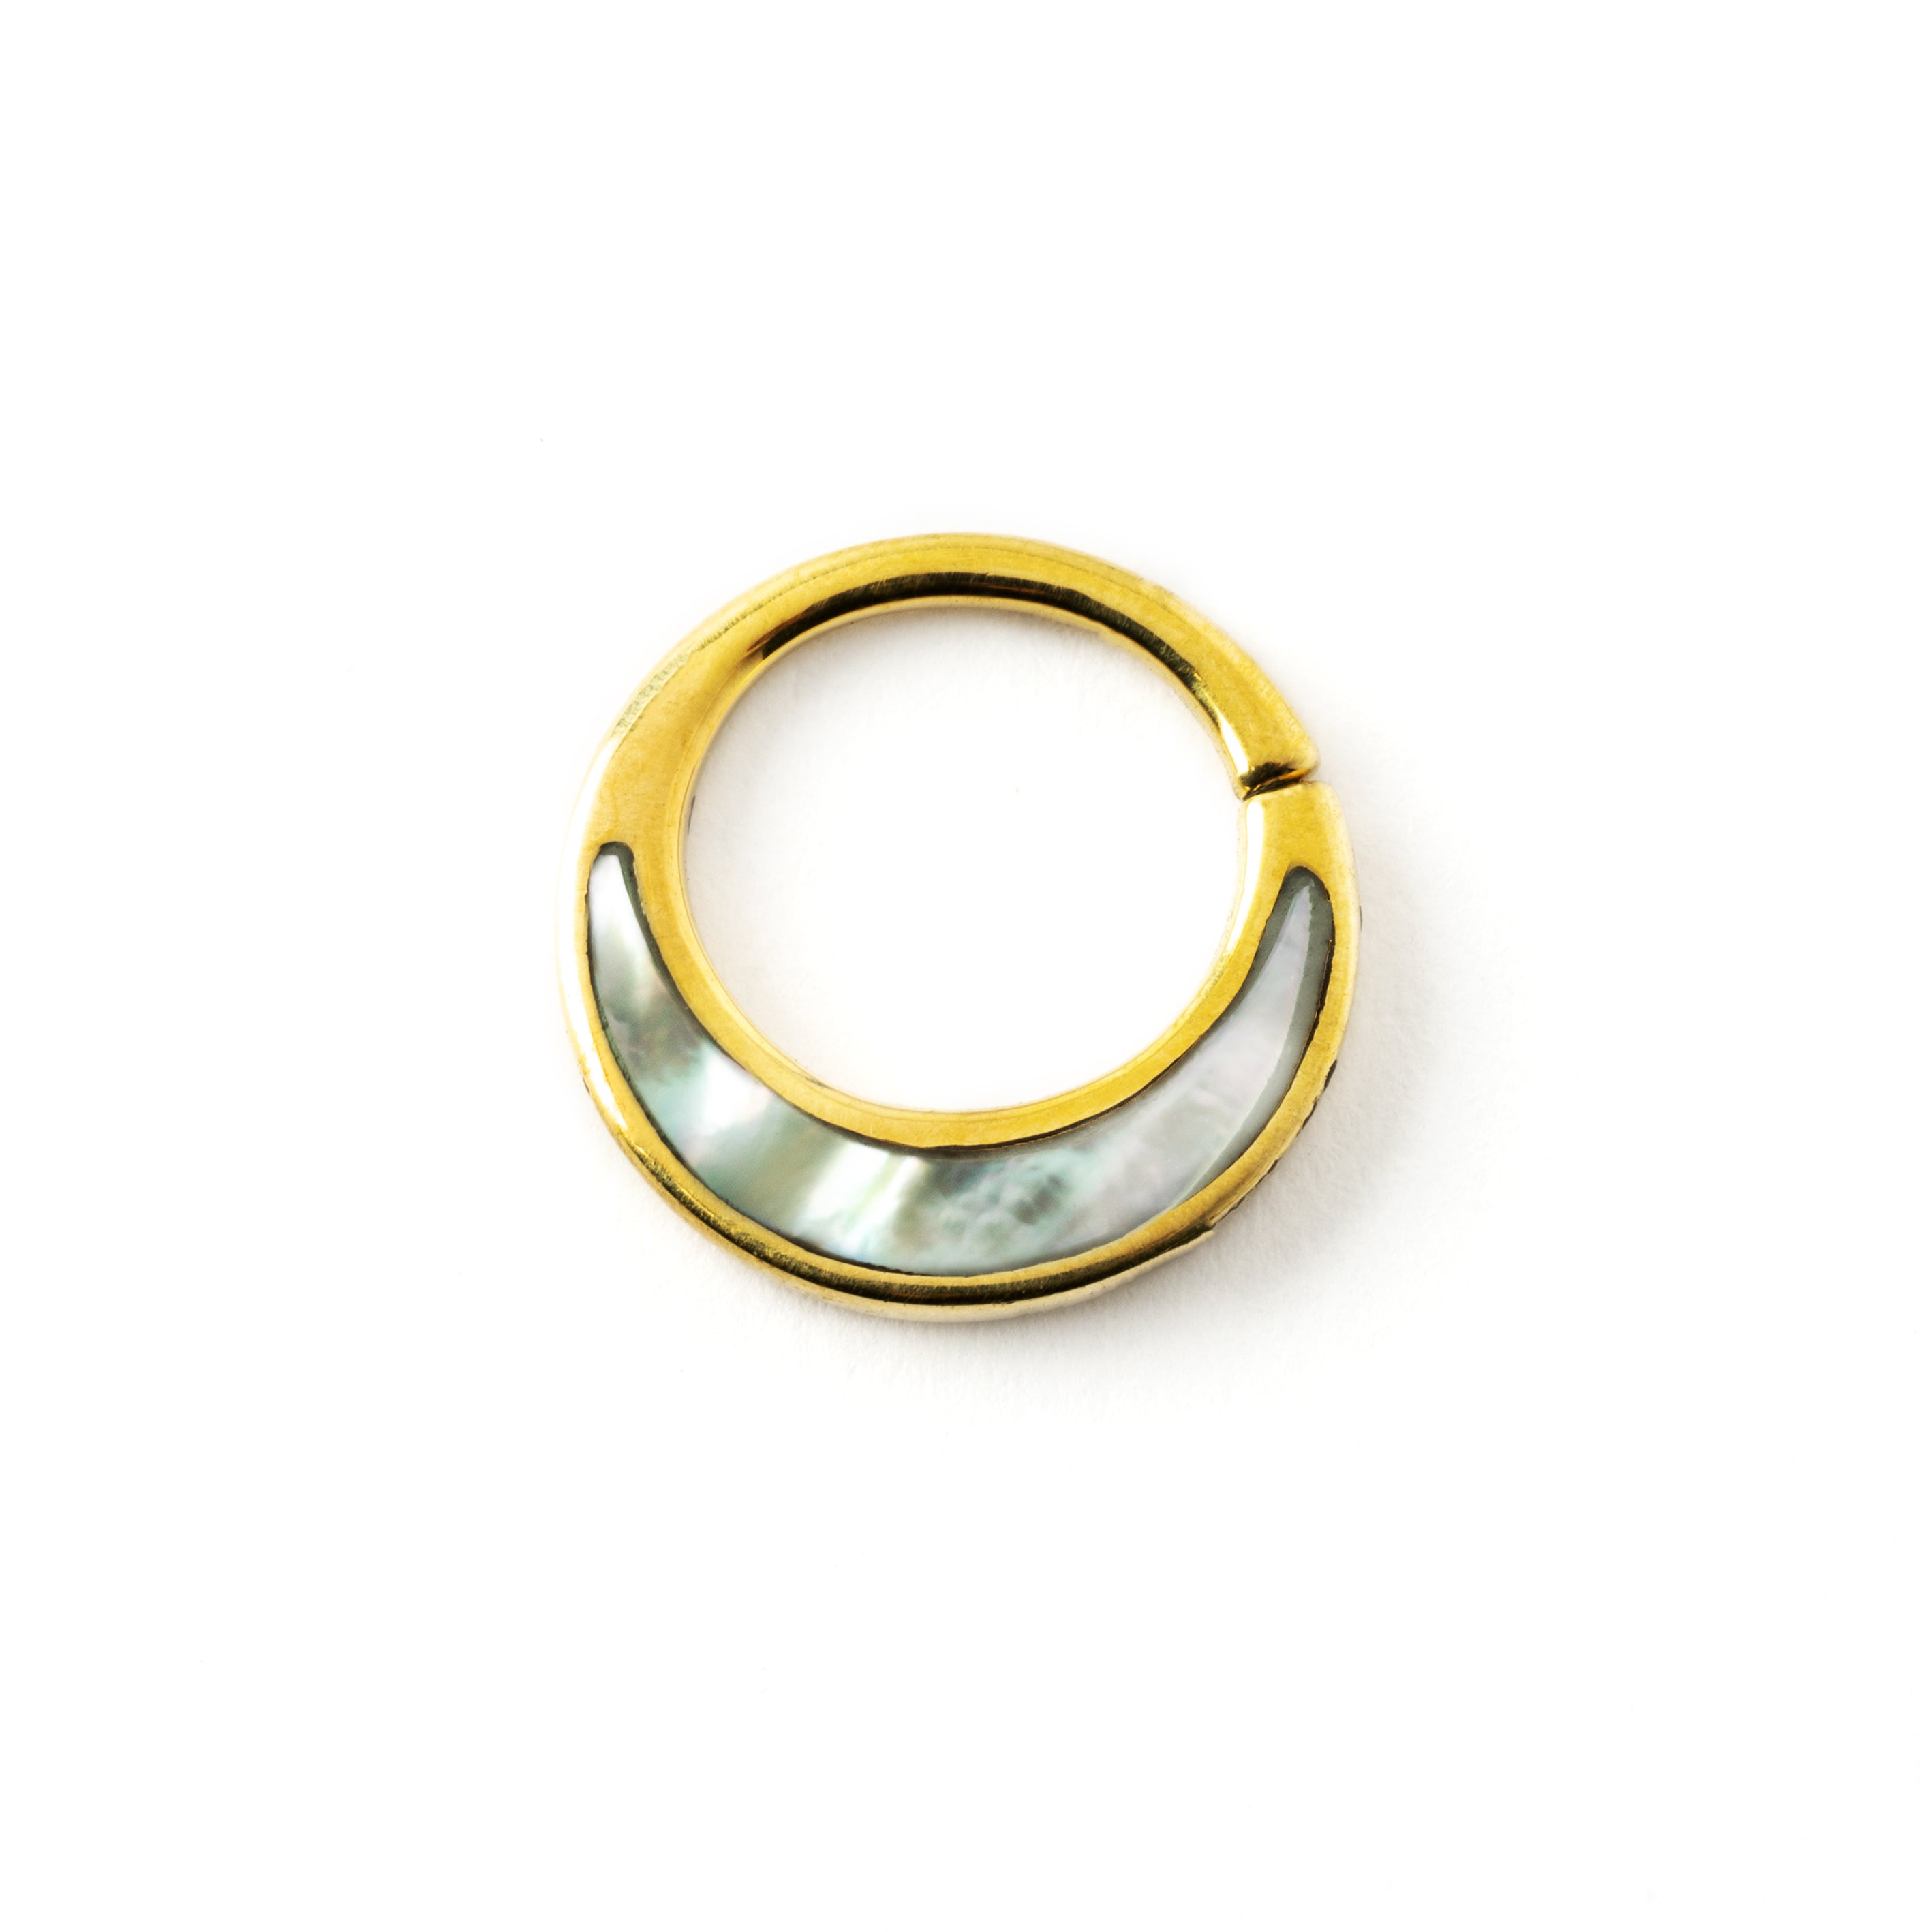 Golden brass septum piercing ring with mother of pearl inlay frontal view